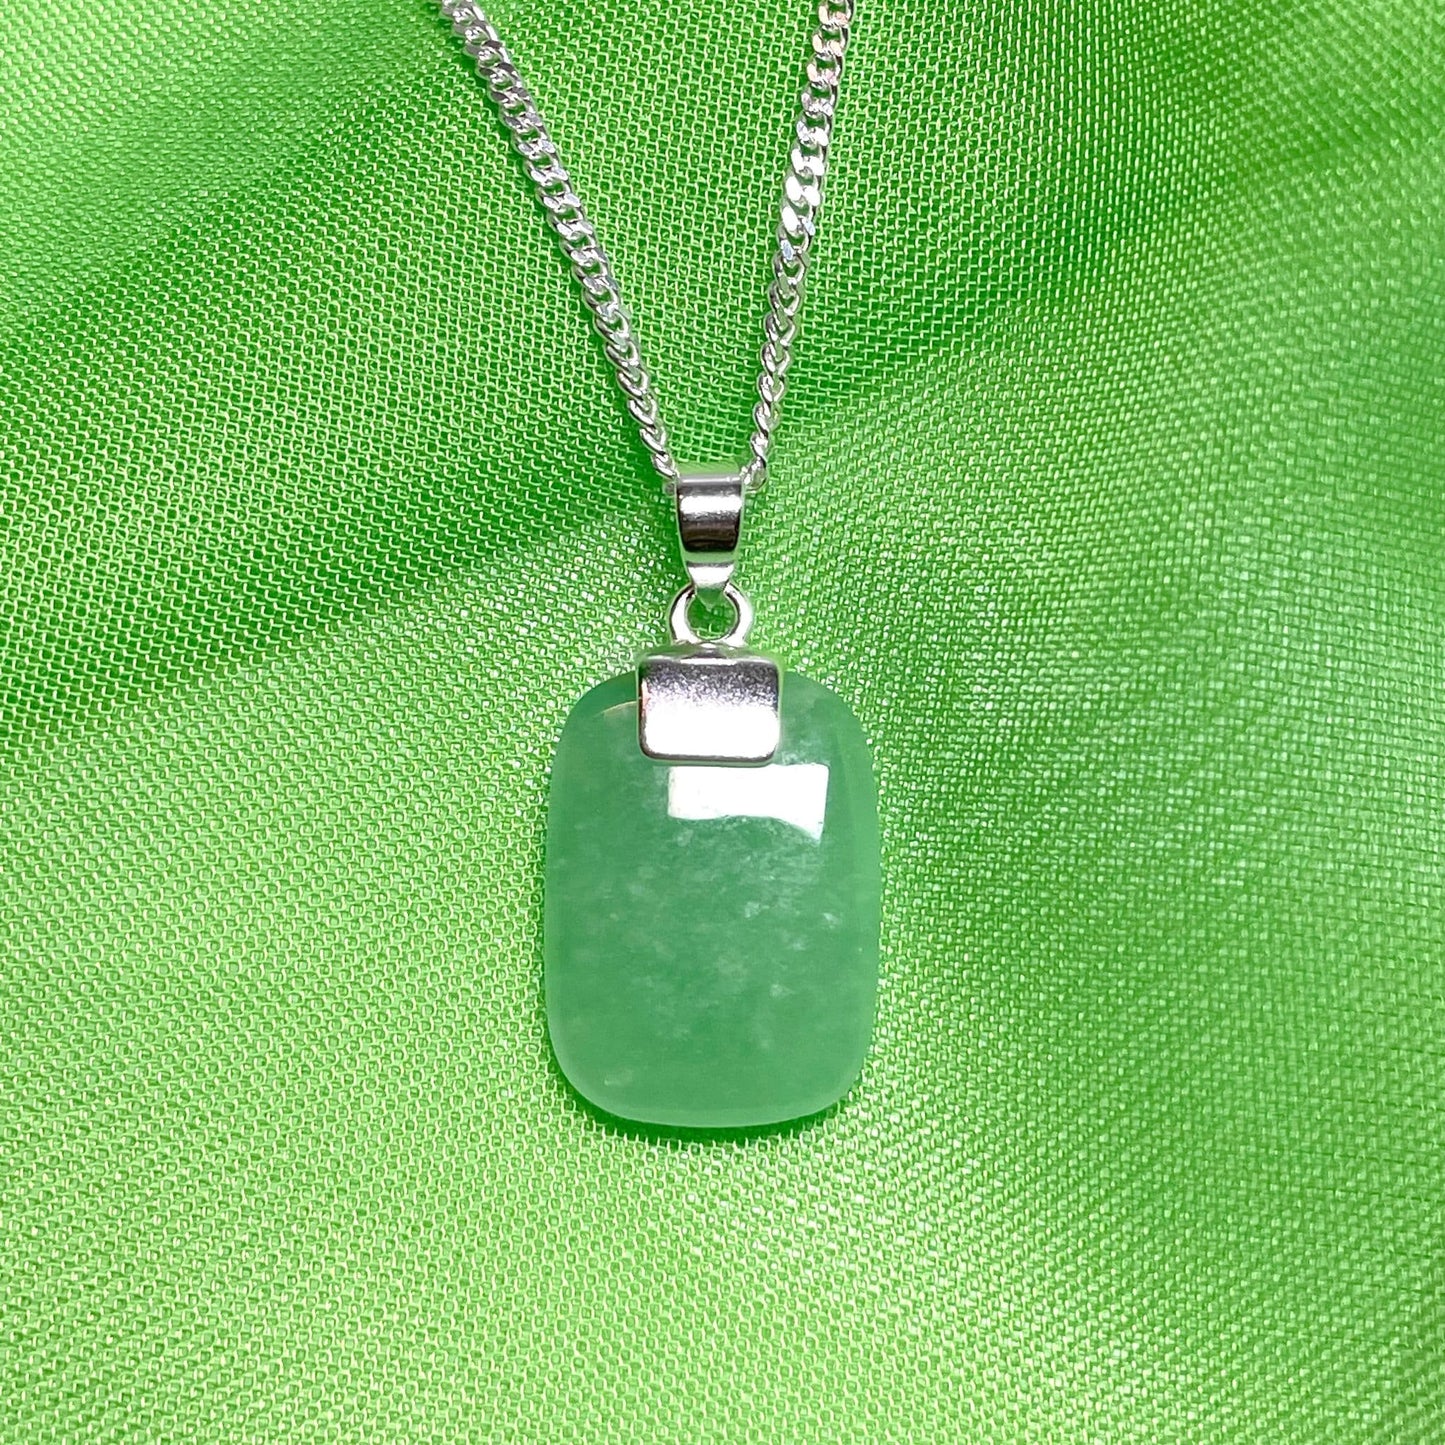 Cushion Shaped Silver Real Green Jade Necklace Pendant